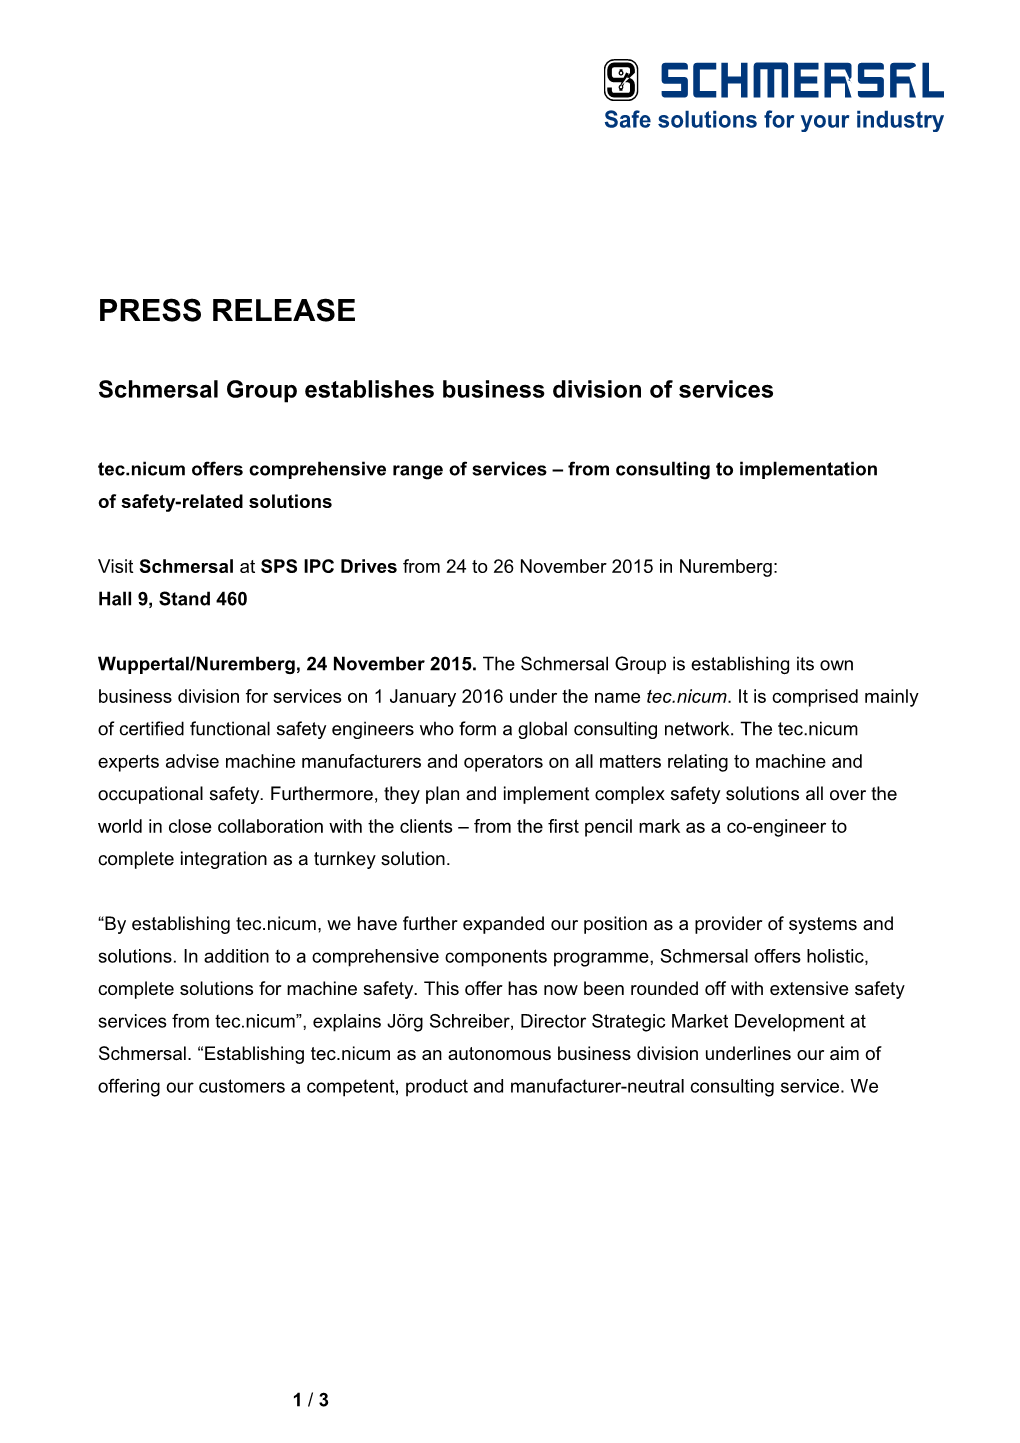 Schmersal Group Establishes Business Division of Services